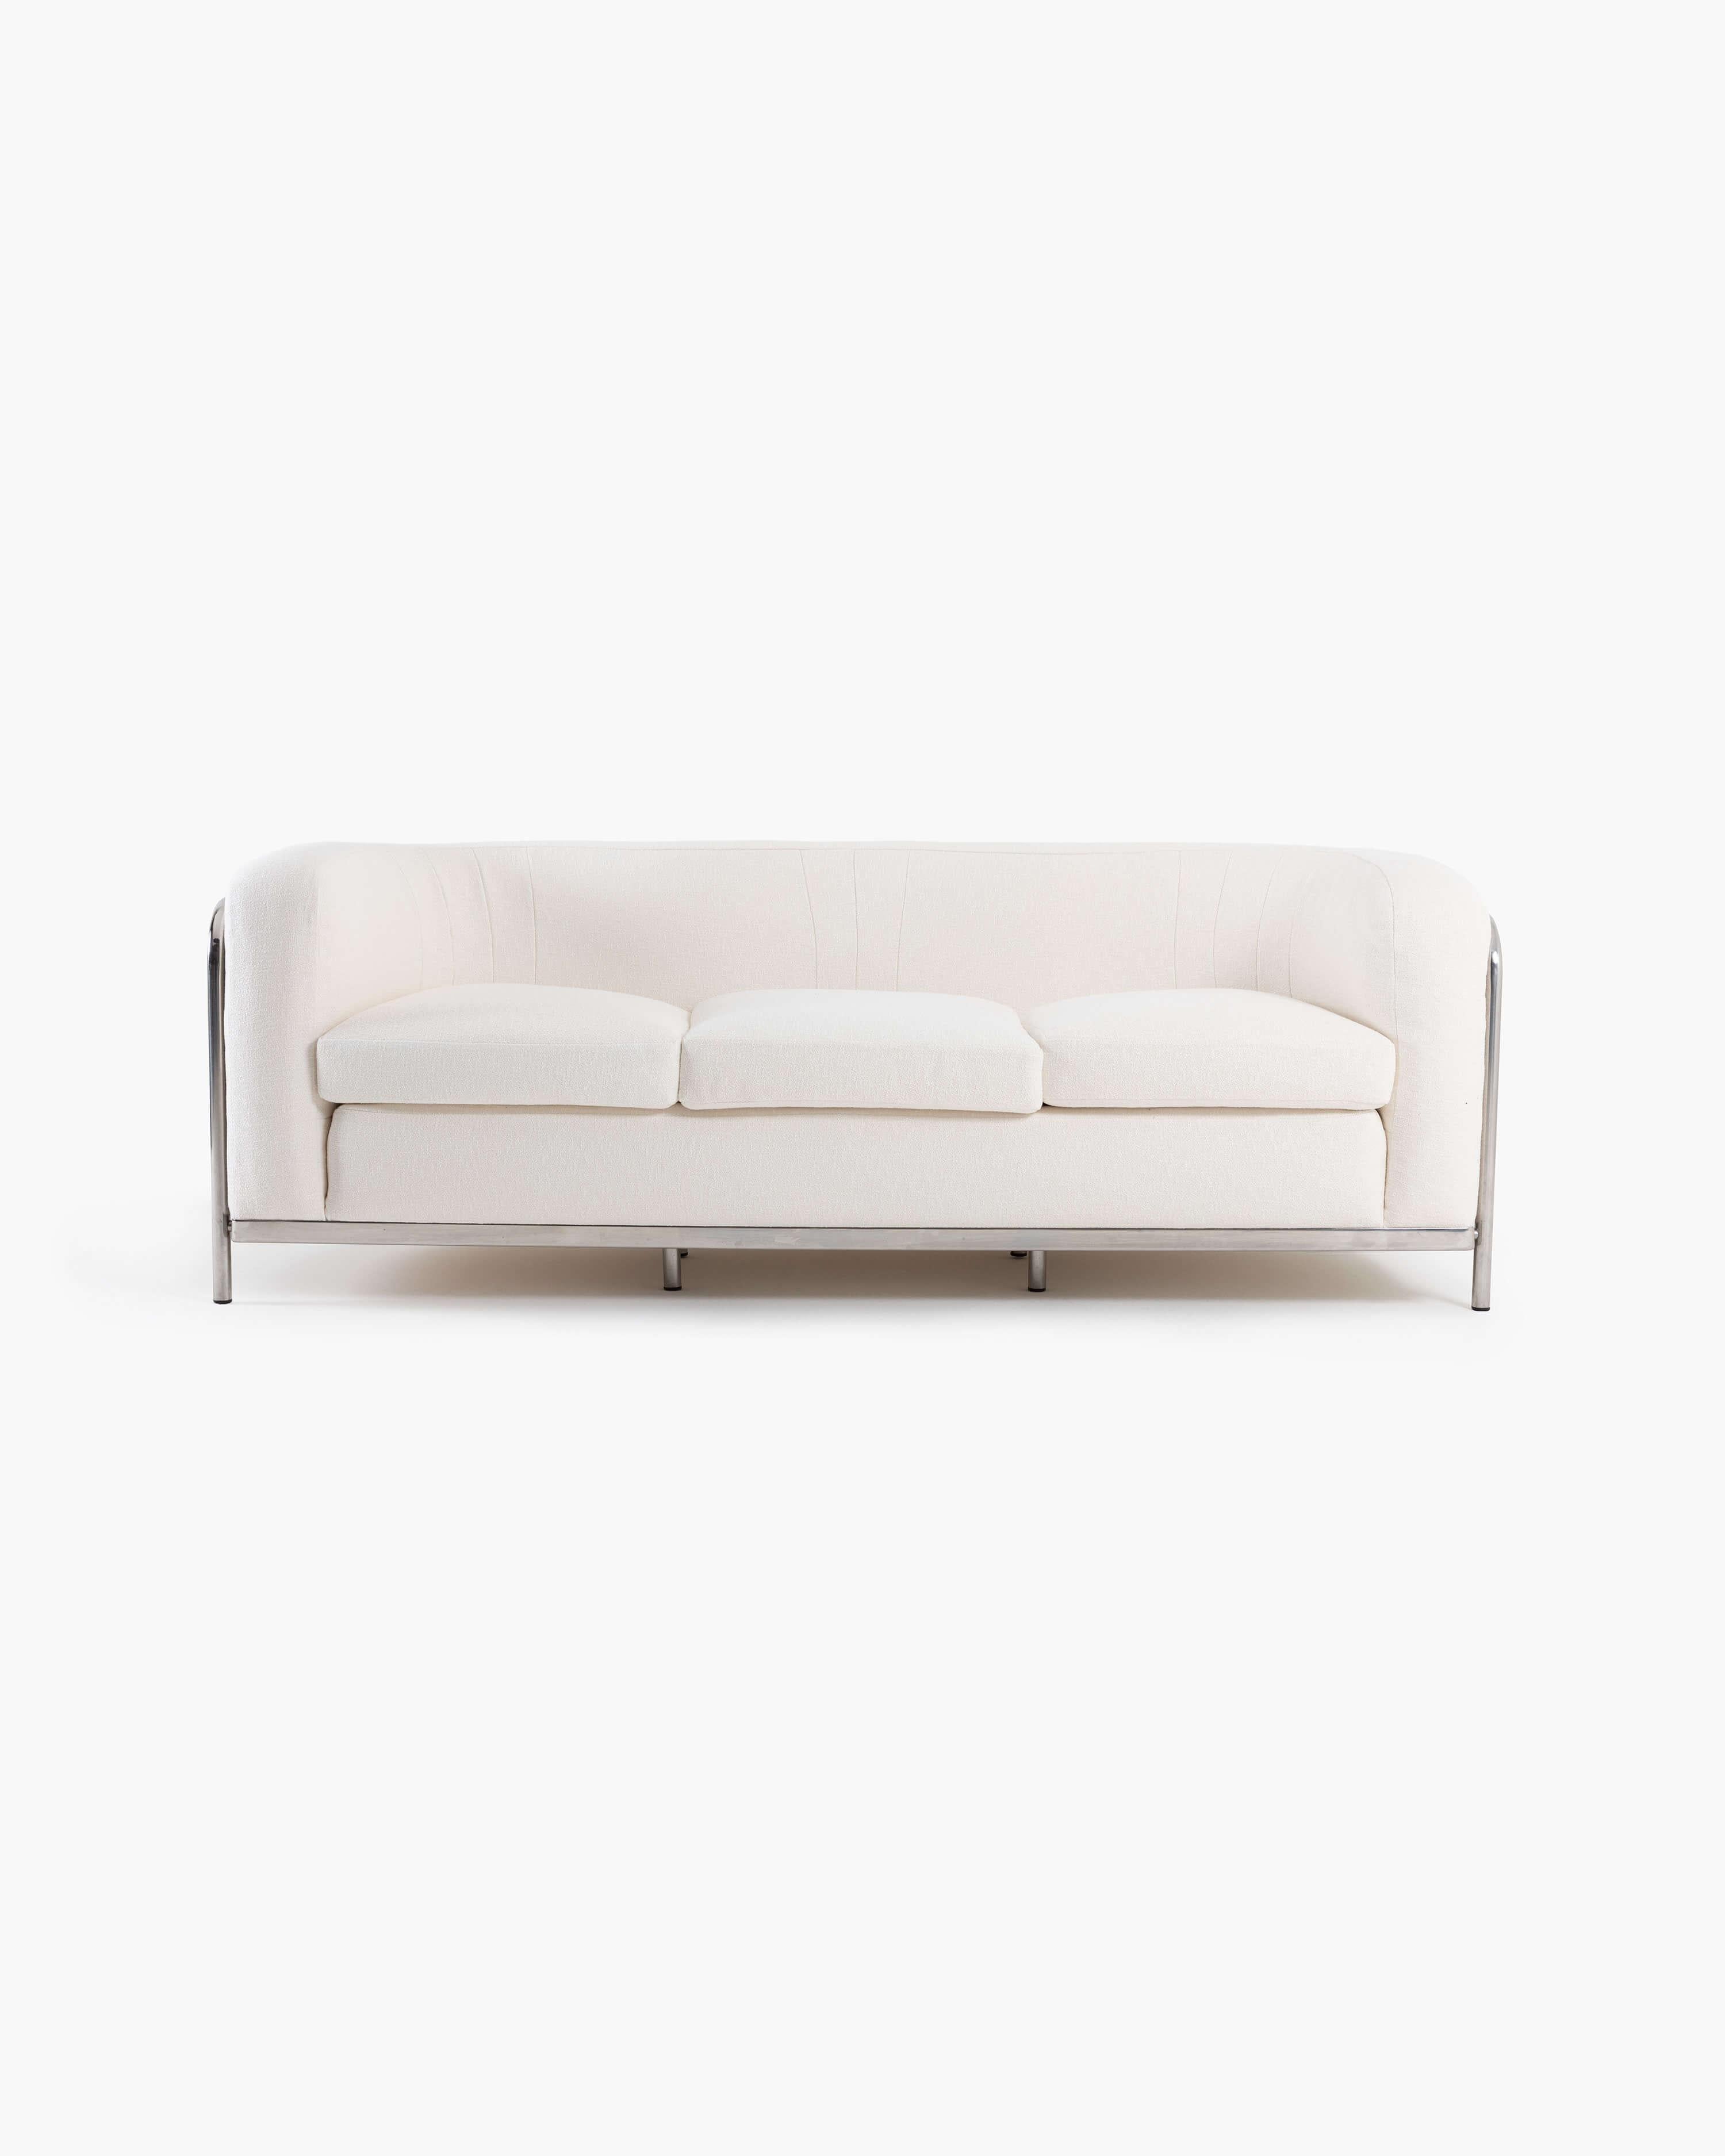 The Onda three-seat sofa–Onda meaning “wave” in Italian– by Jonathan De Pas, Donato D'Urbino and Paolo Lomazzi, earns its namesake from the tubular stainless steel frame that forms its support structure, curving in and out along the back of the